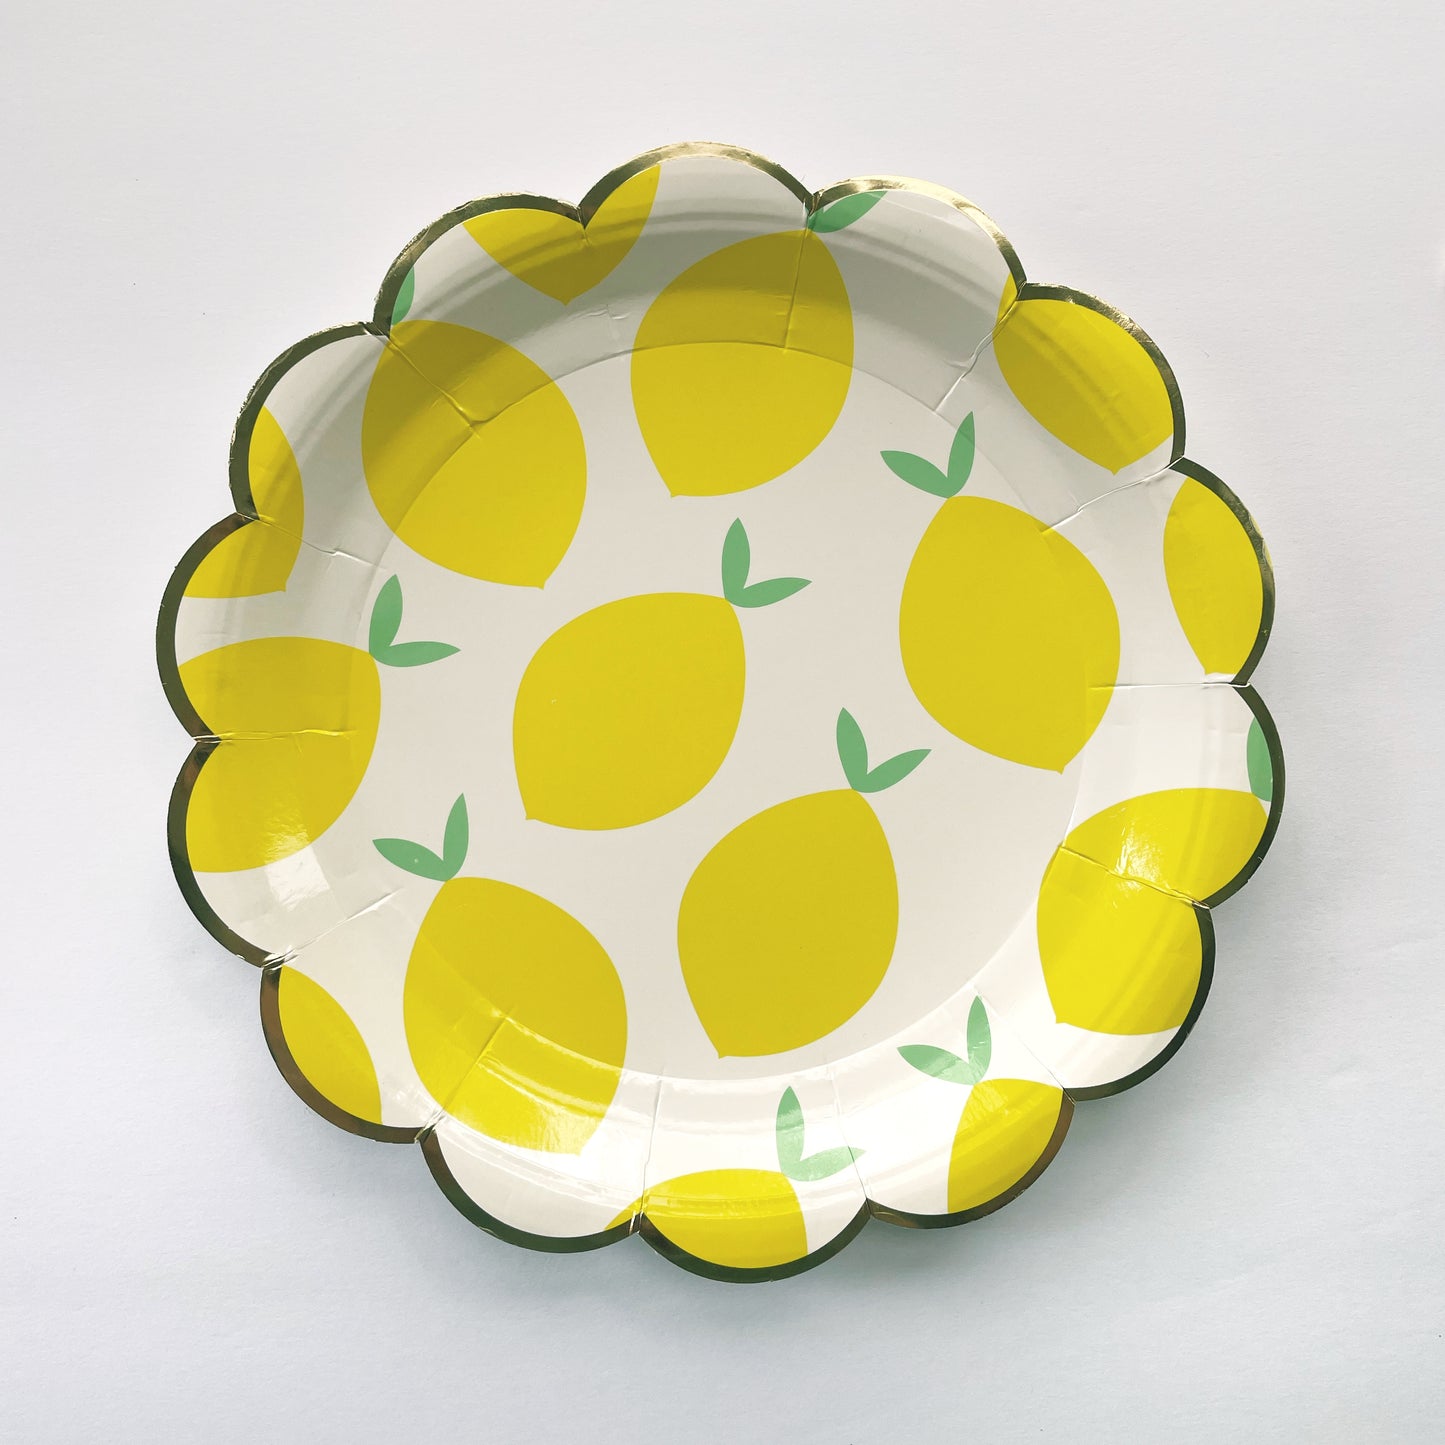 The Lemon Party Kit's paper party plates. The lemon pattern includes yellow, green and white colours. The party plates have gold scalloped edges.